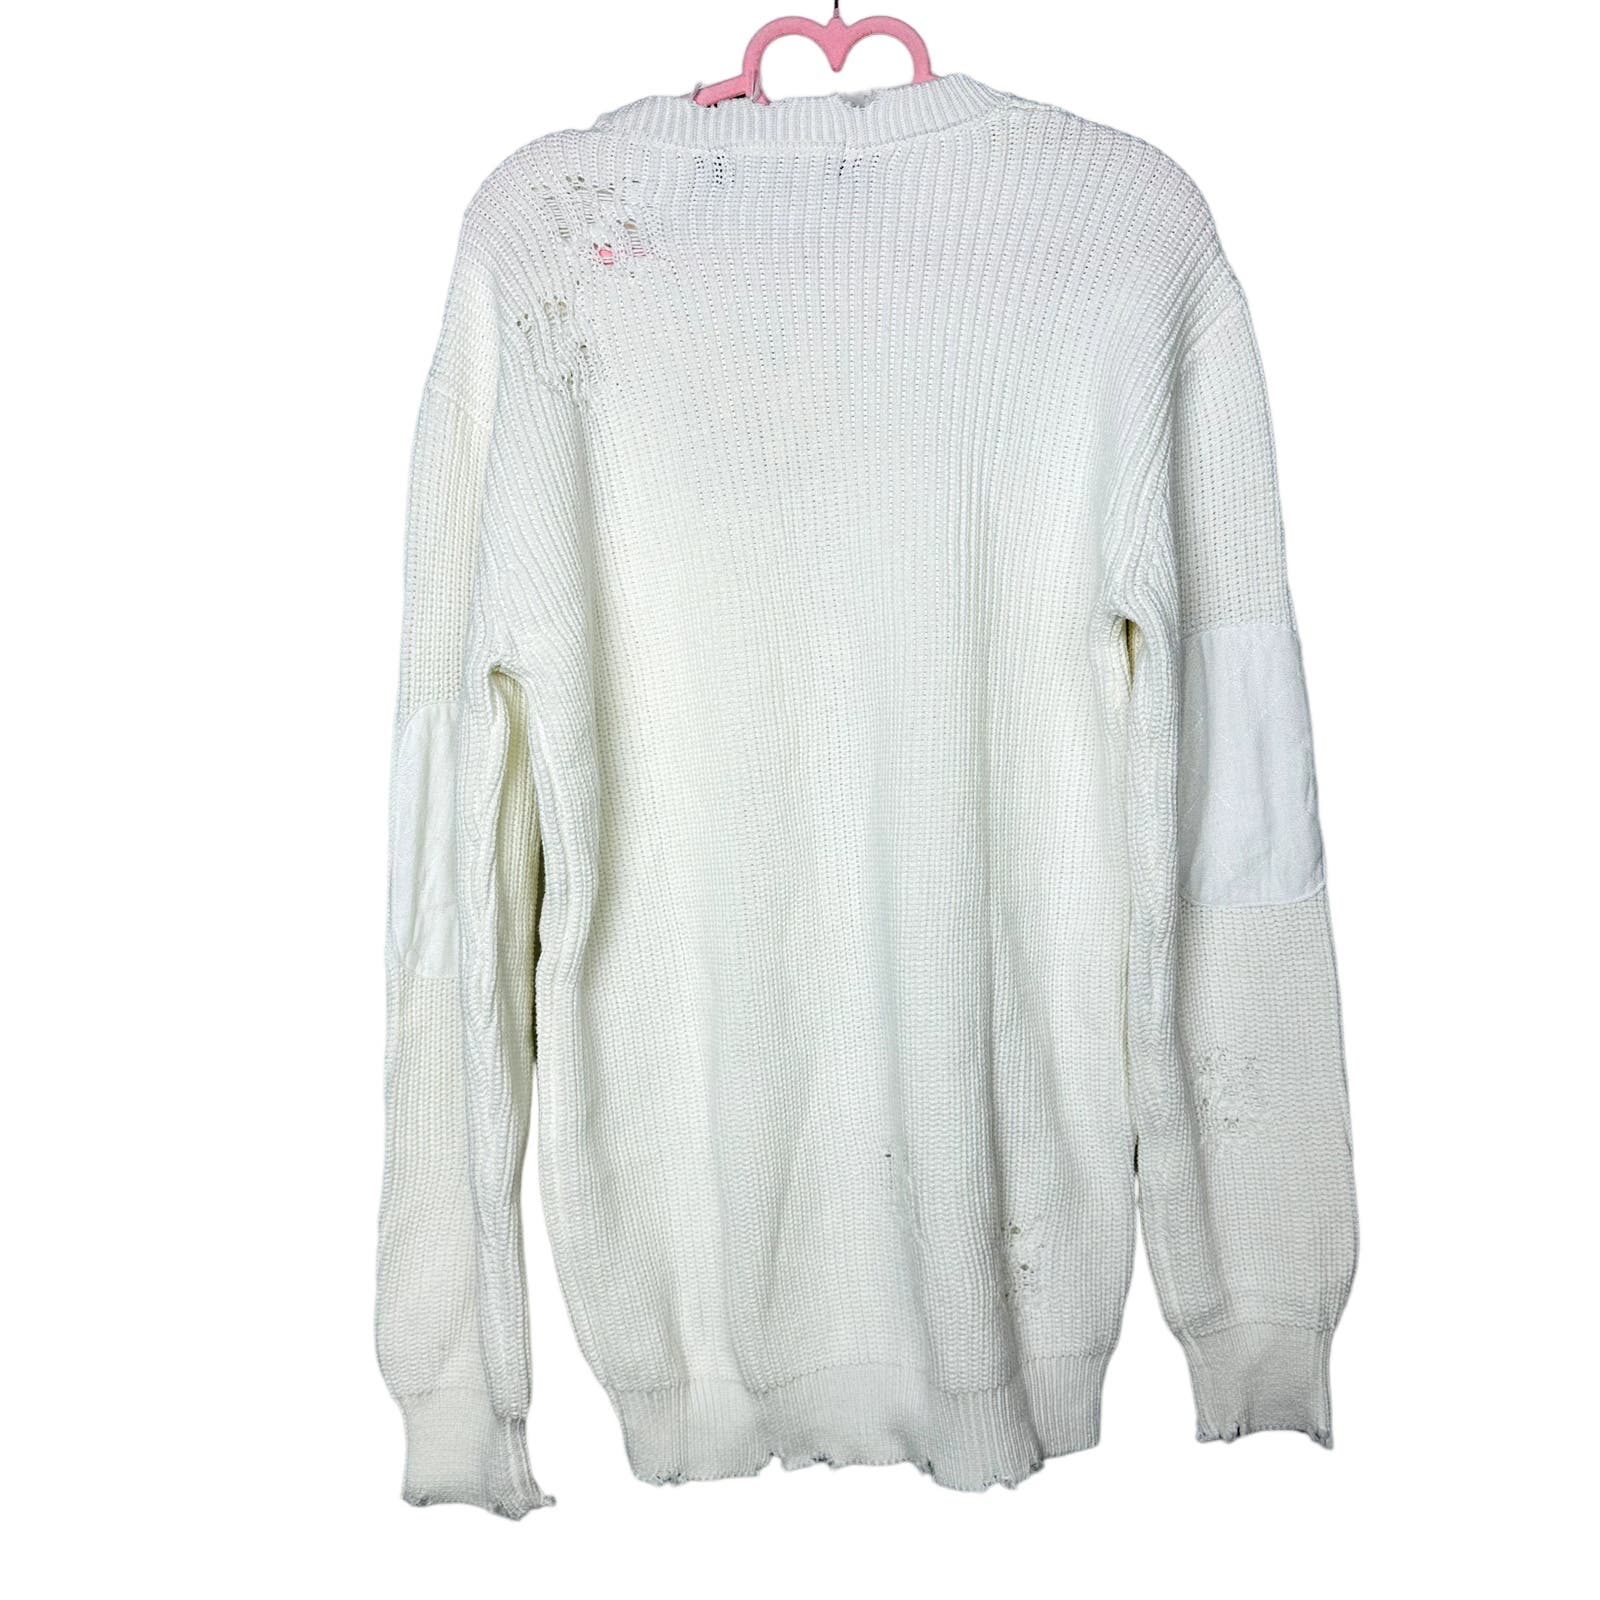 Ser.O.Ya Revolve NWT Devin Sweater White Distressed Cable Knit Pullover Size 2XS